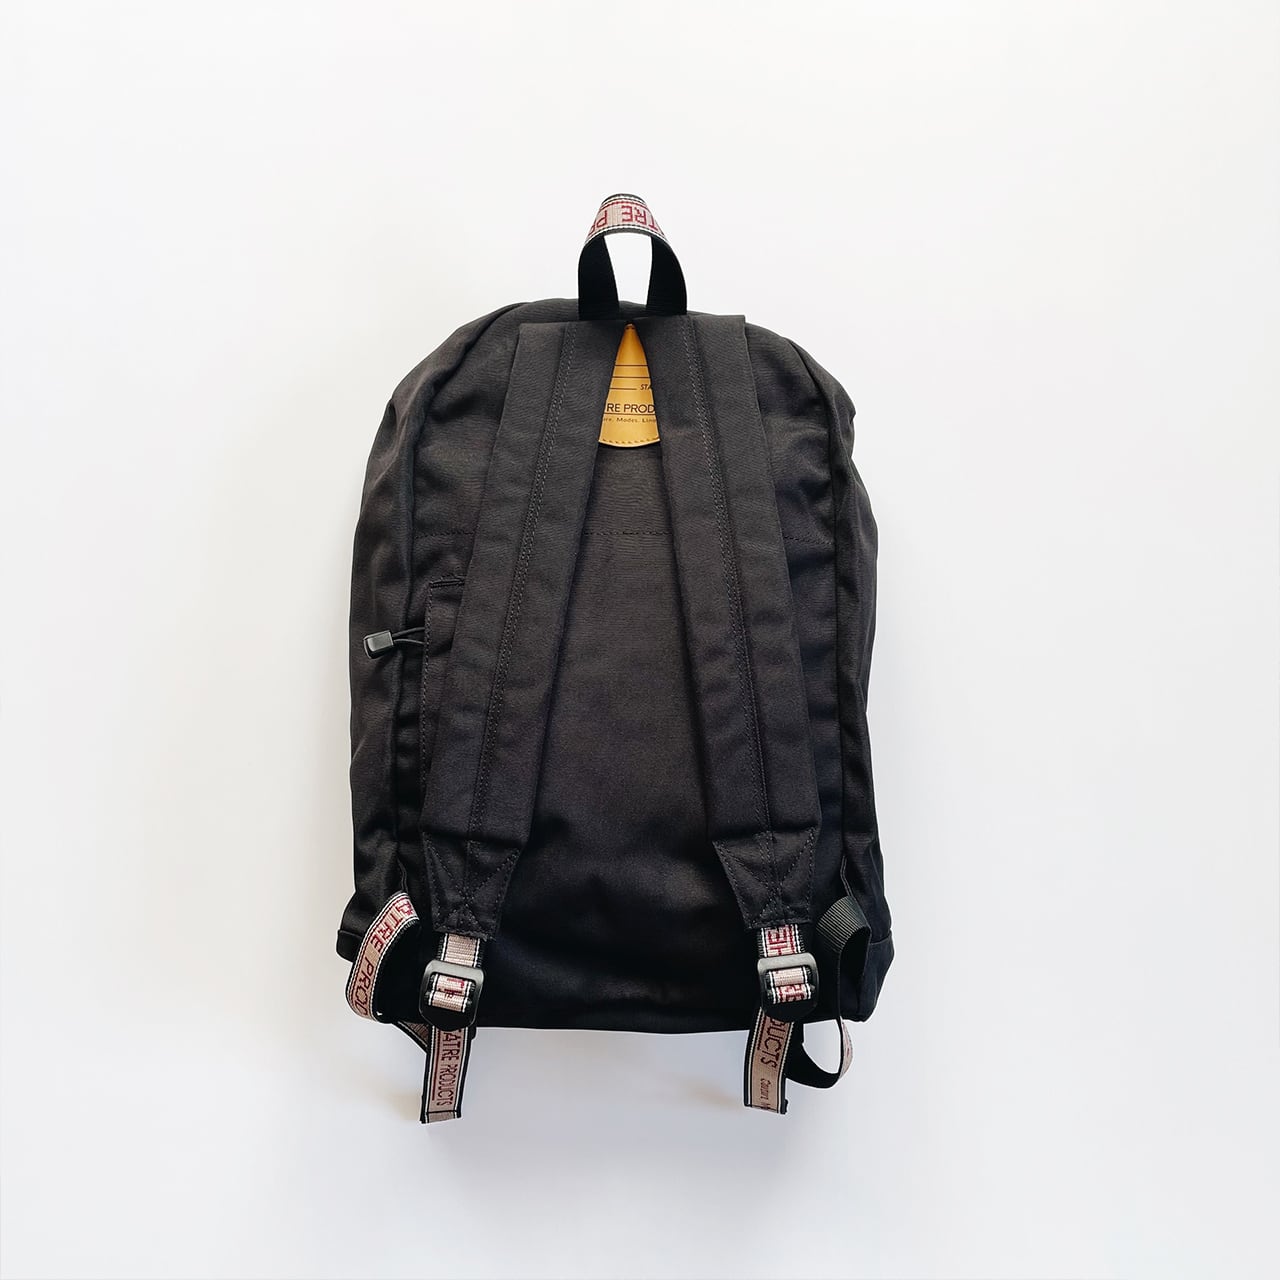 【THEATRE PRODUCTS】BACKPACK